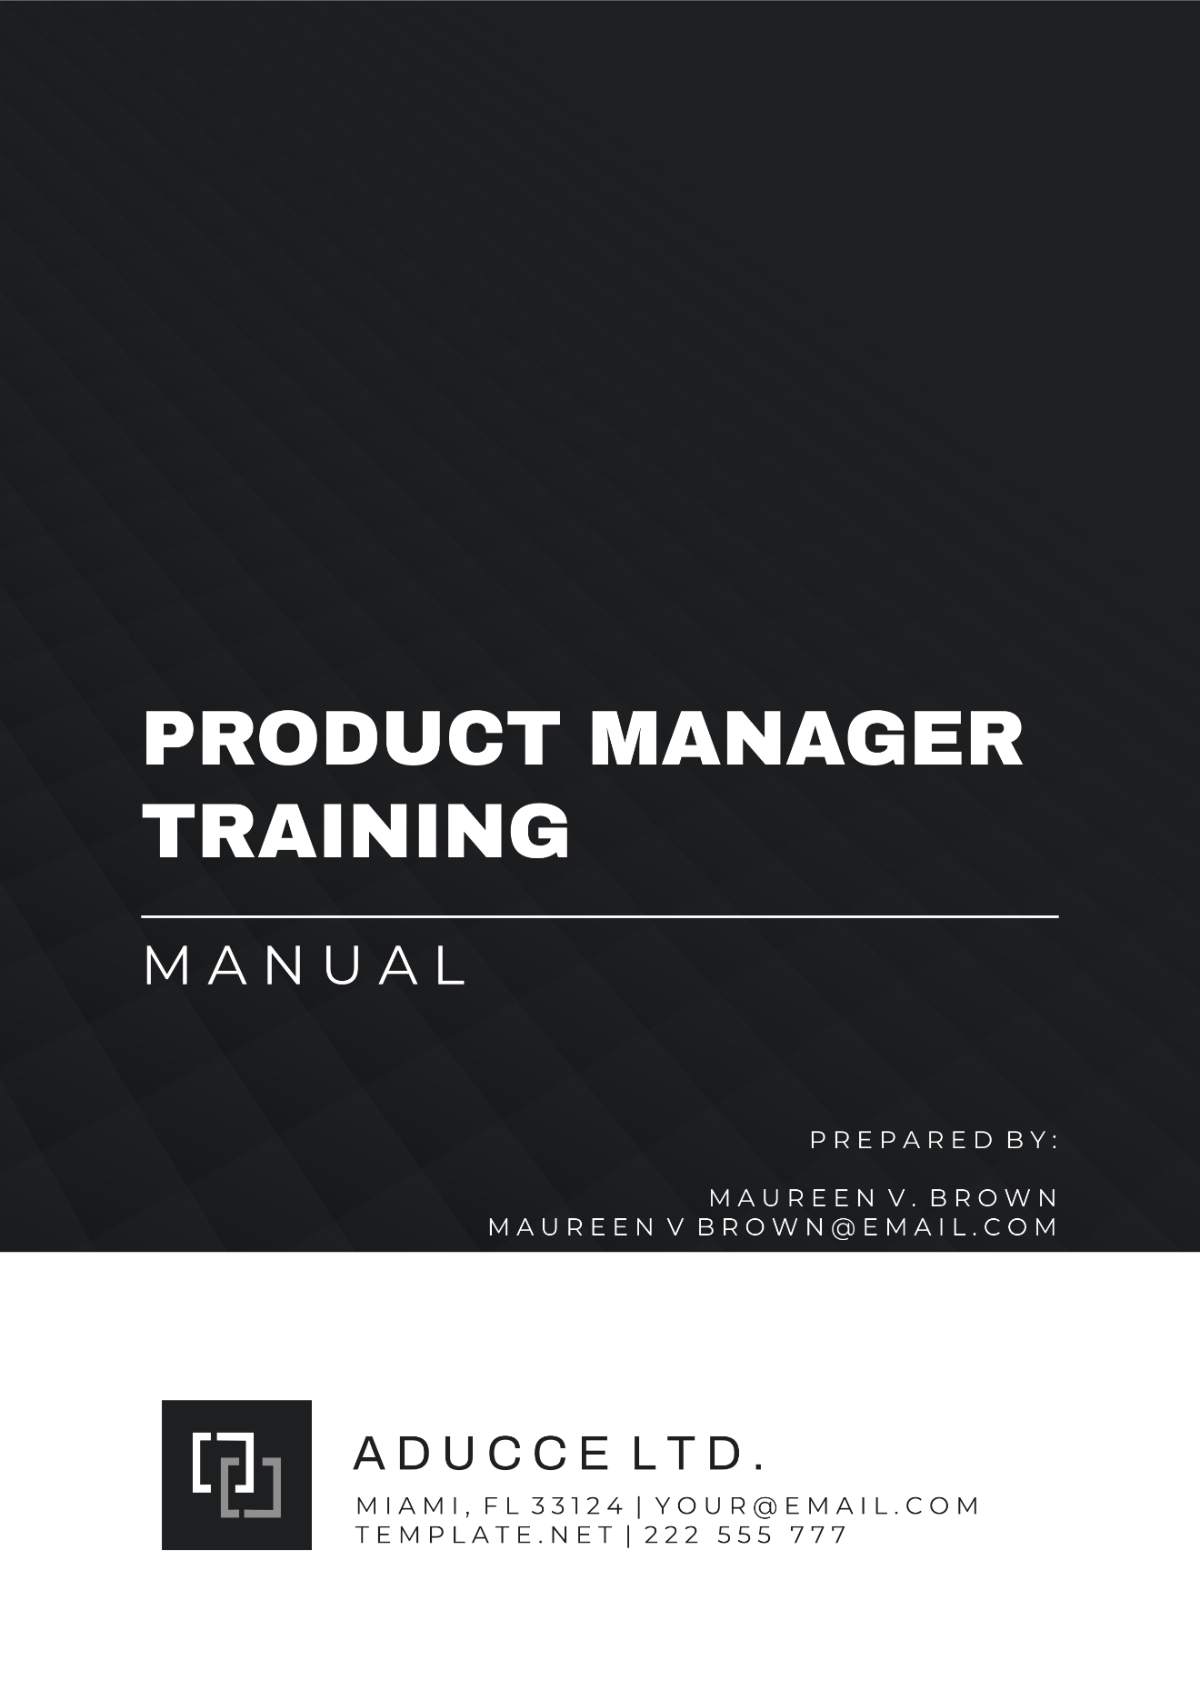 Free Product Manager Training Manual Template